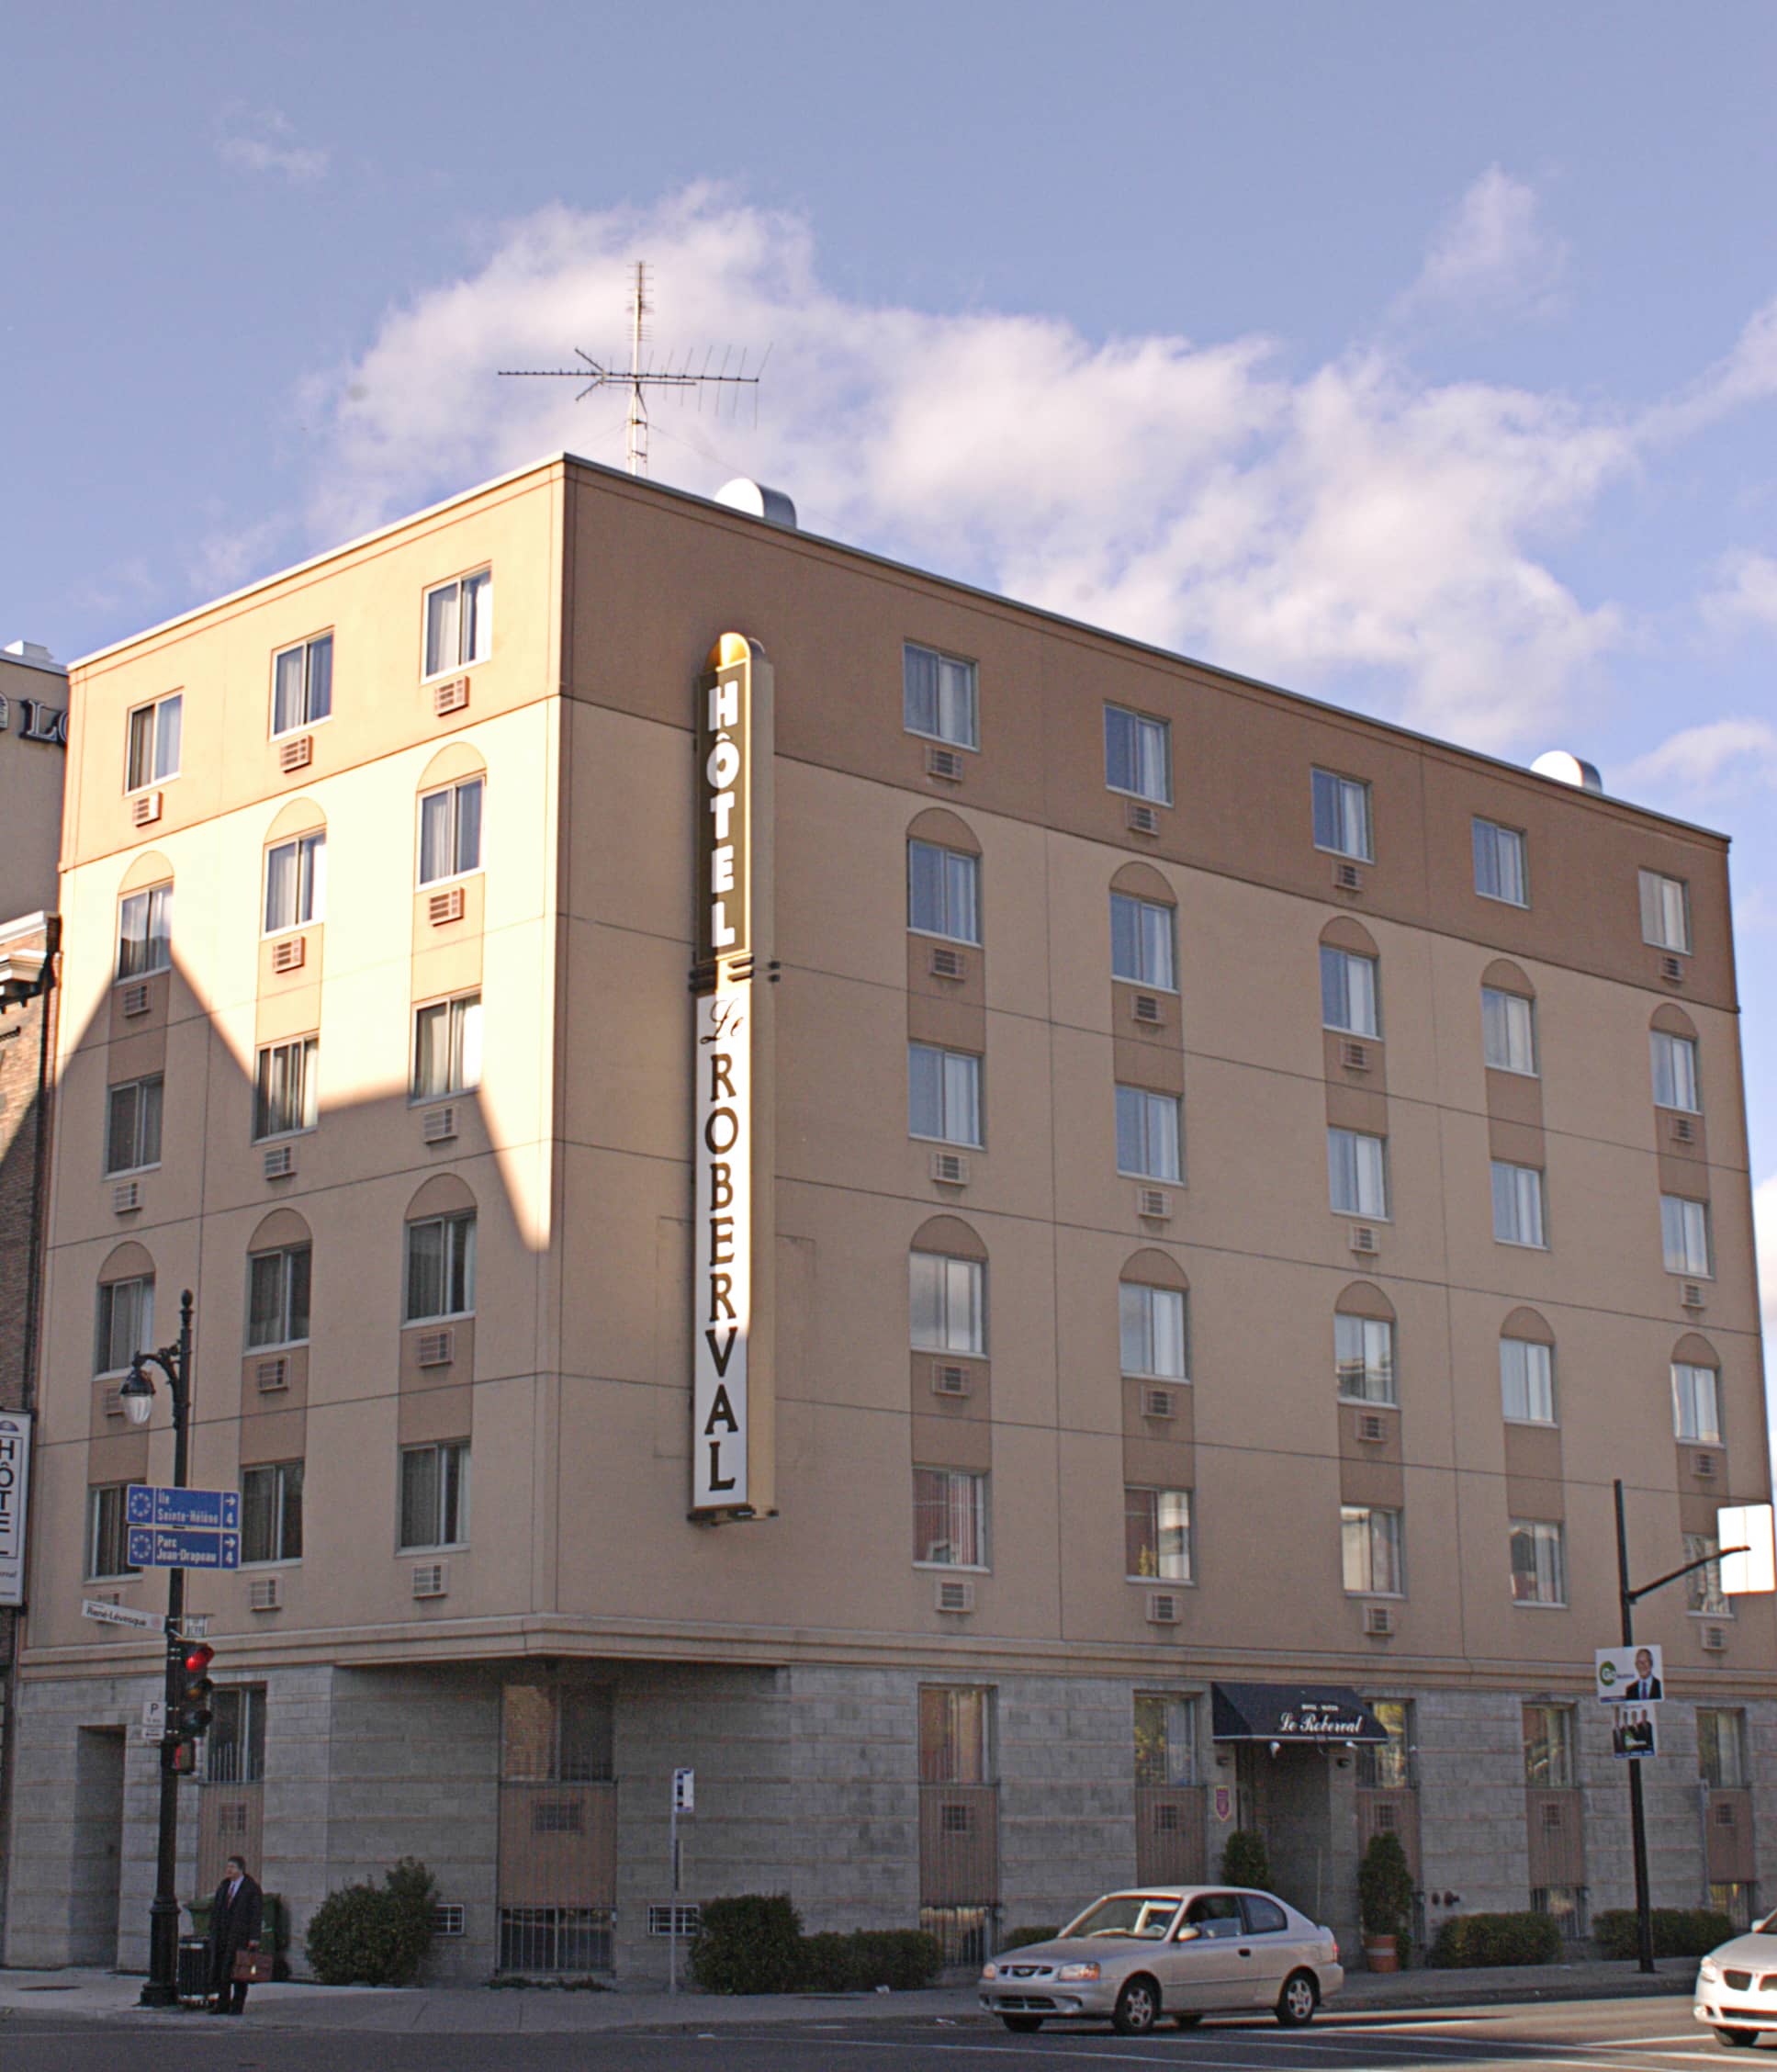 Montreal - Hotel Roberval